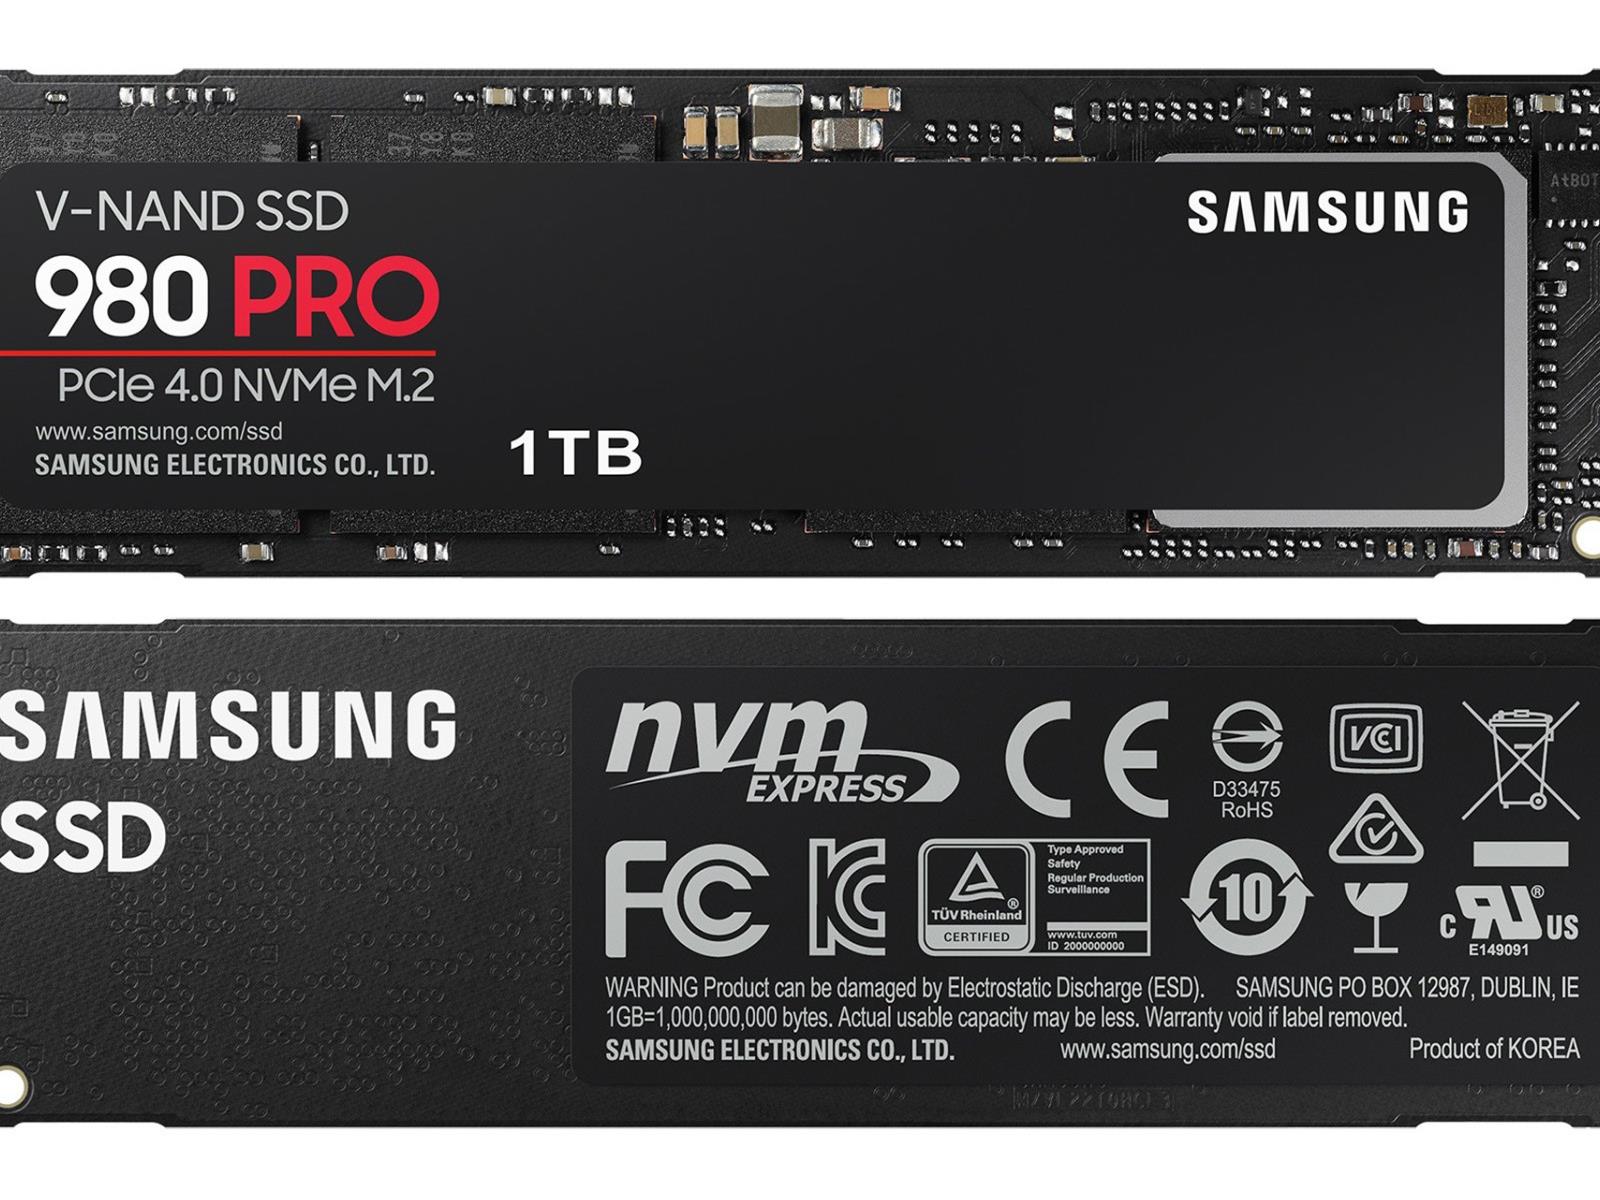 Sequential IO Performance - The Samsung 980 PRO PCIe 4.0 SSD